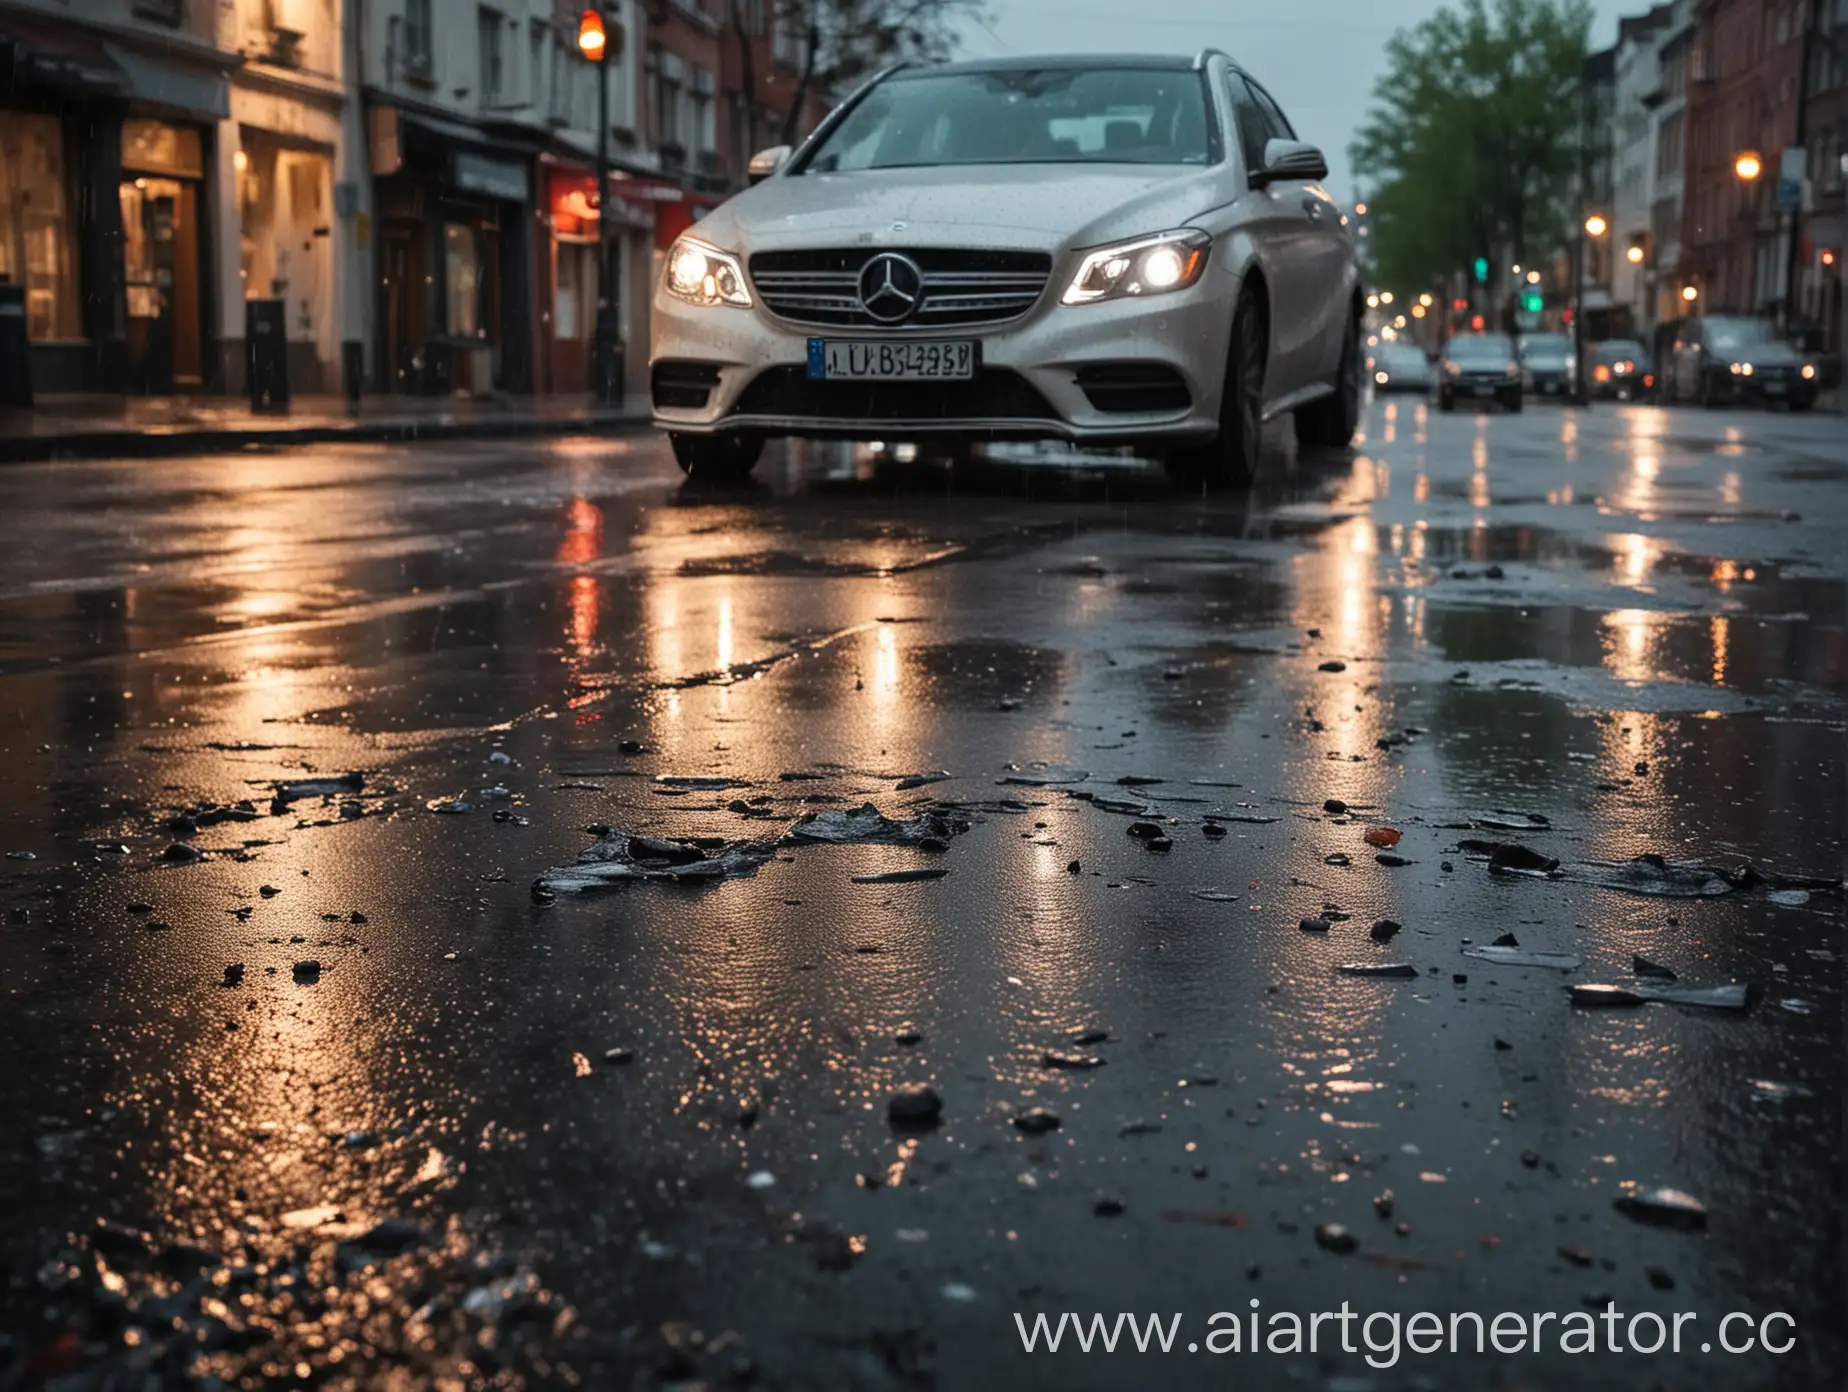 Rainy-Evening-Cityscape-with-MercedesBenz-Car-and-Reflective-Puddles